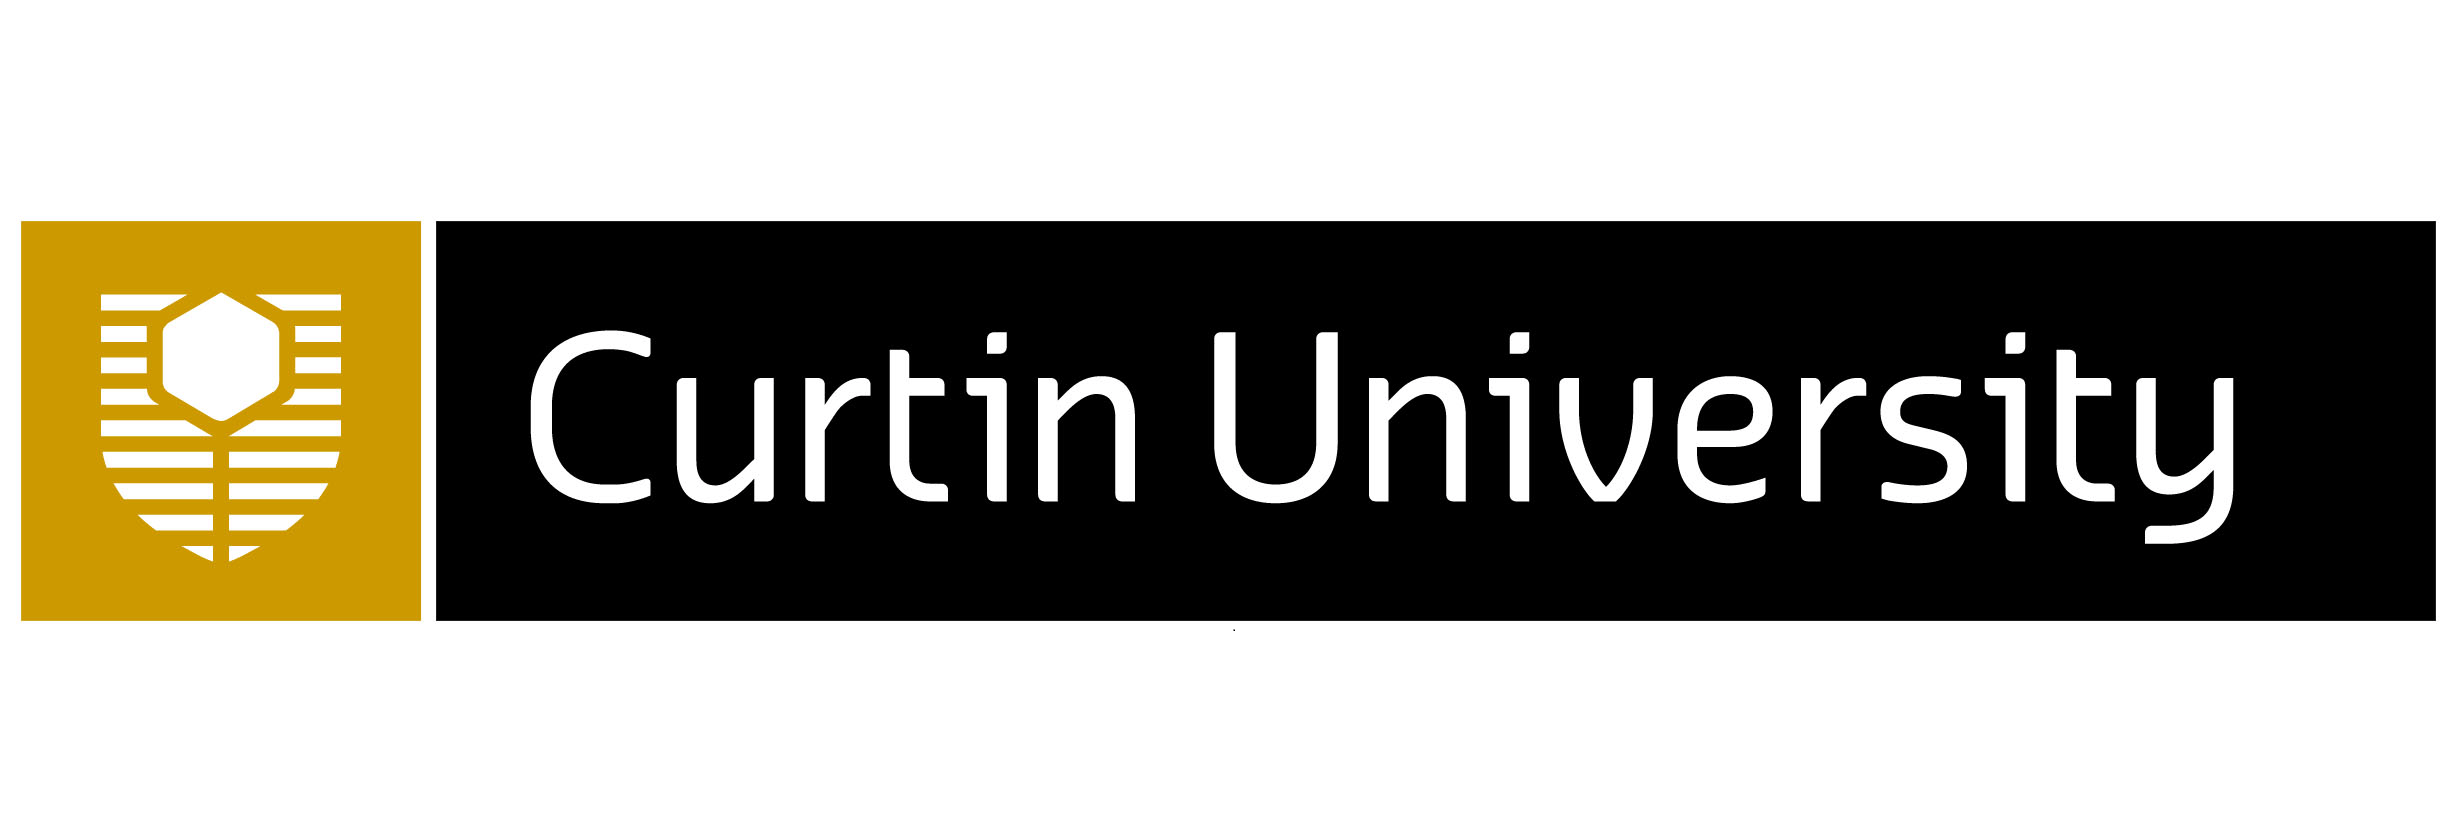 Graduate Certificate in Corrosion Engineering | Graduate diploma / certificate | Engineering & Technology | On Campus | 1 year | Curtin University | Australia